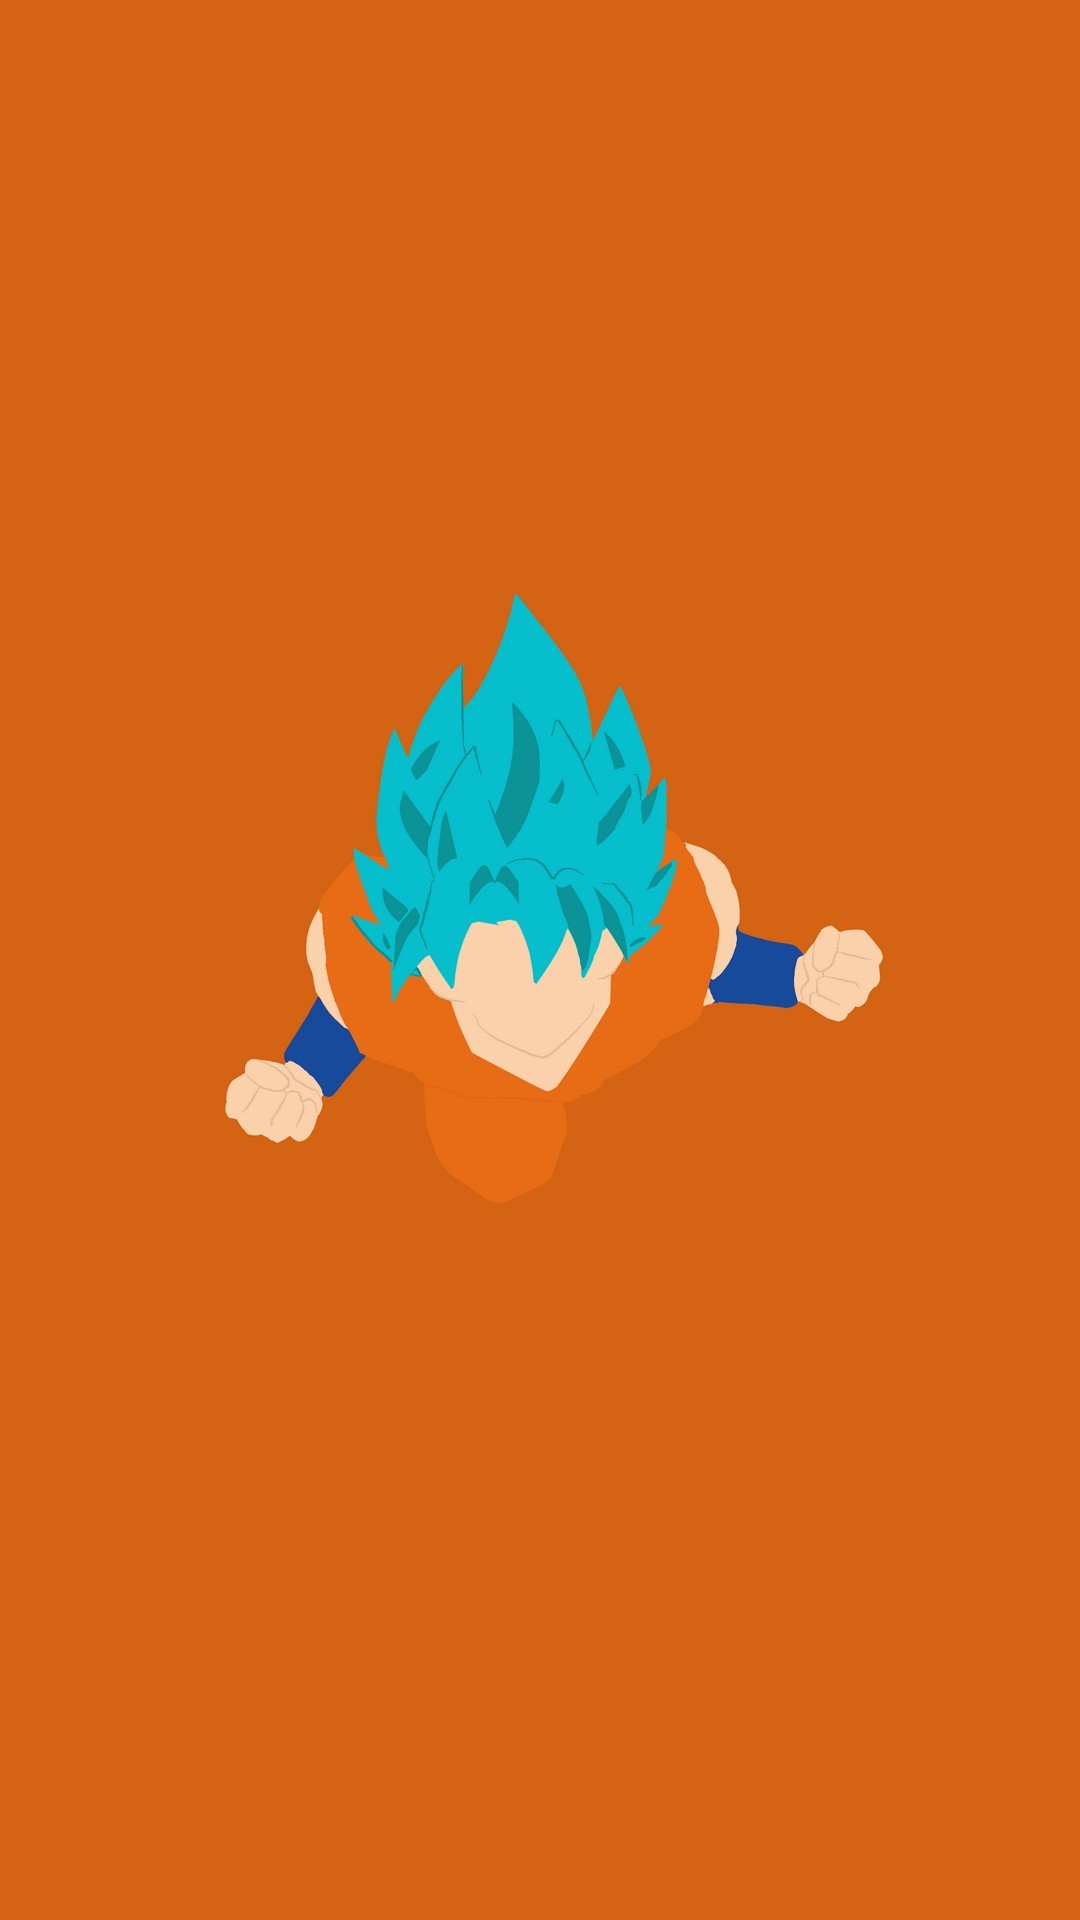 Goku SSJ iPhone Wallpaper with image resolution 1080x1920 pixel. You can make this wallpaper for your iPhone 5, 6, 7, 8, X backgrounds, Mobile Screensaver, or iPad Lock Screen